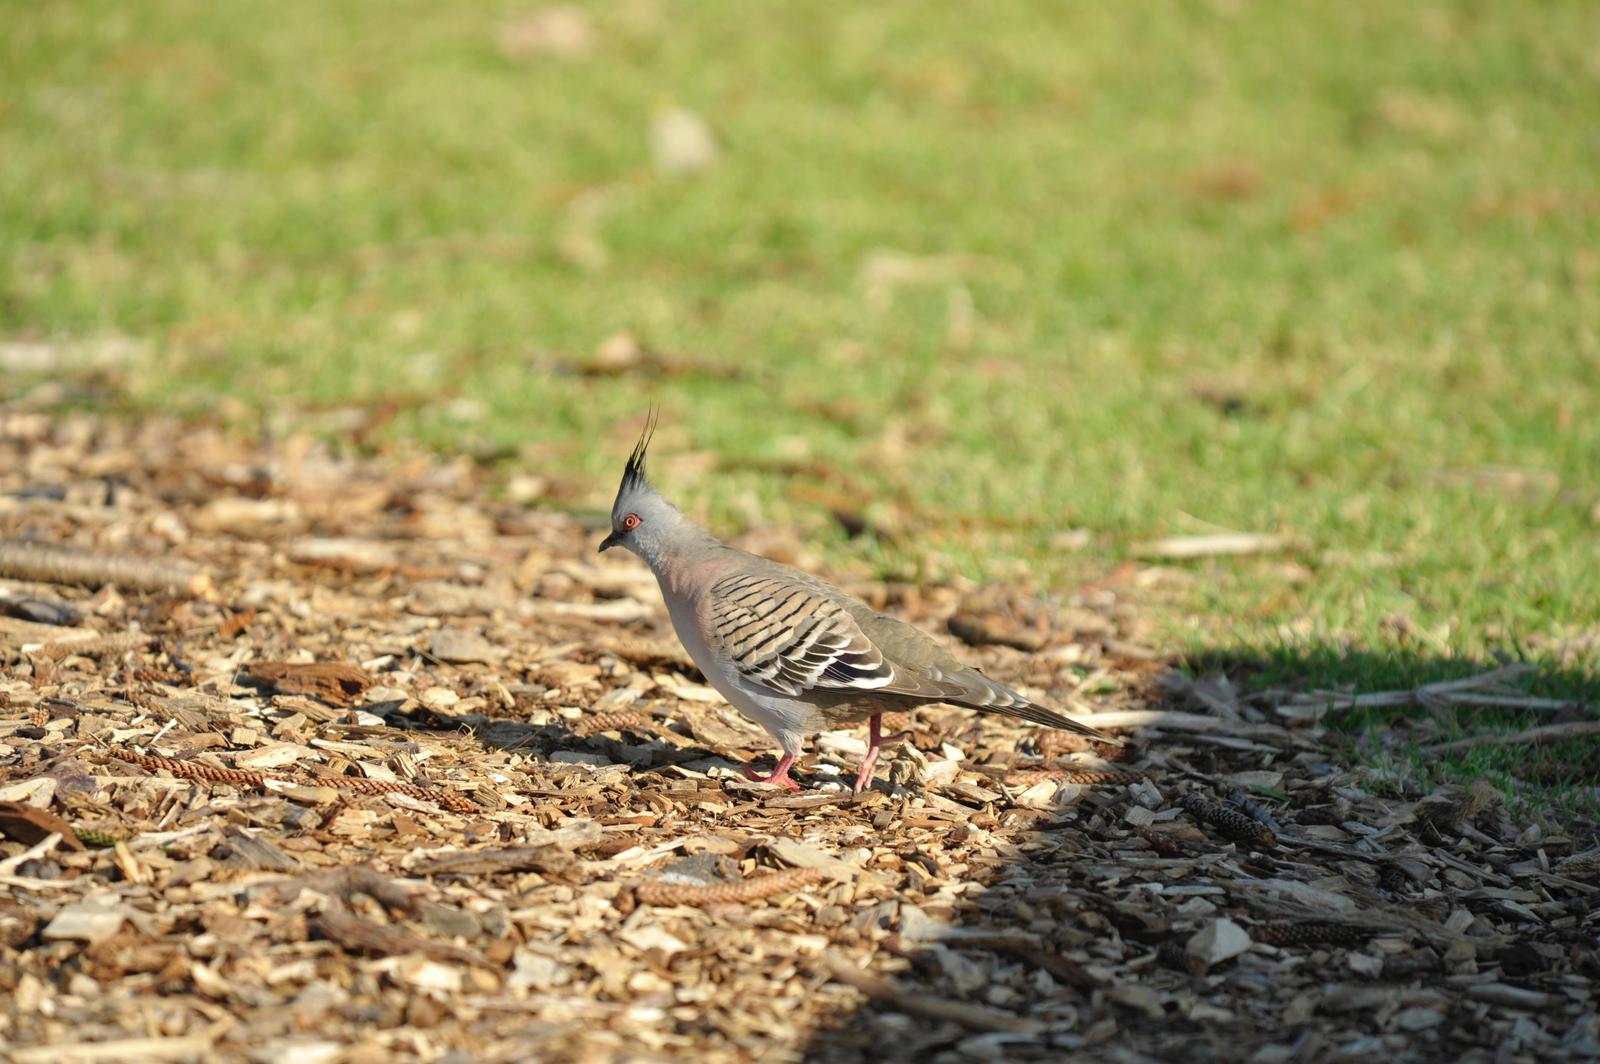 Crested Pigeon Photo by marcel finlay